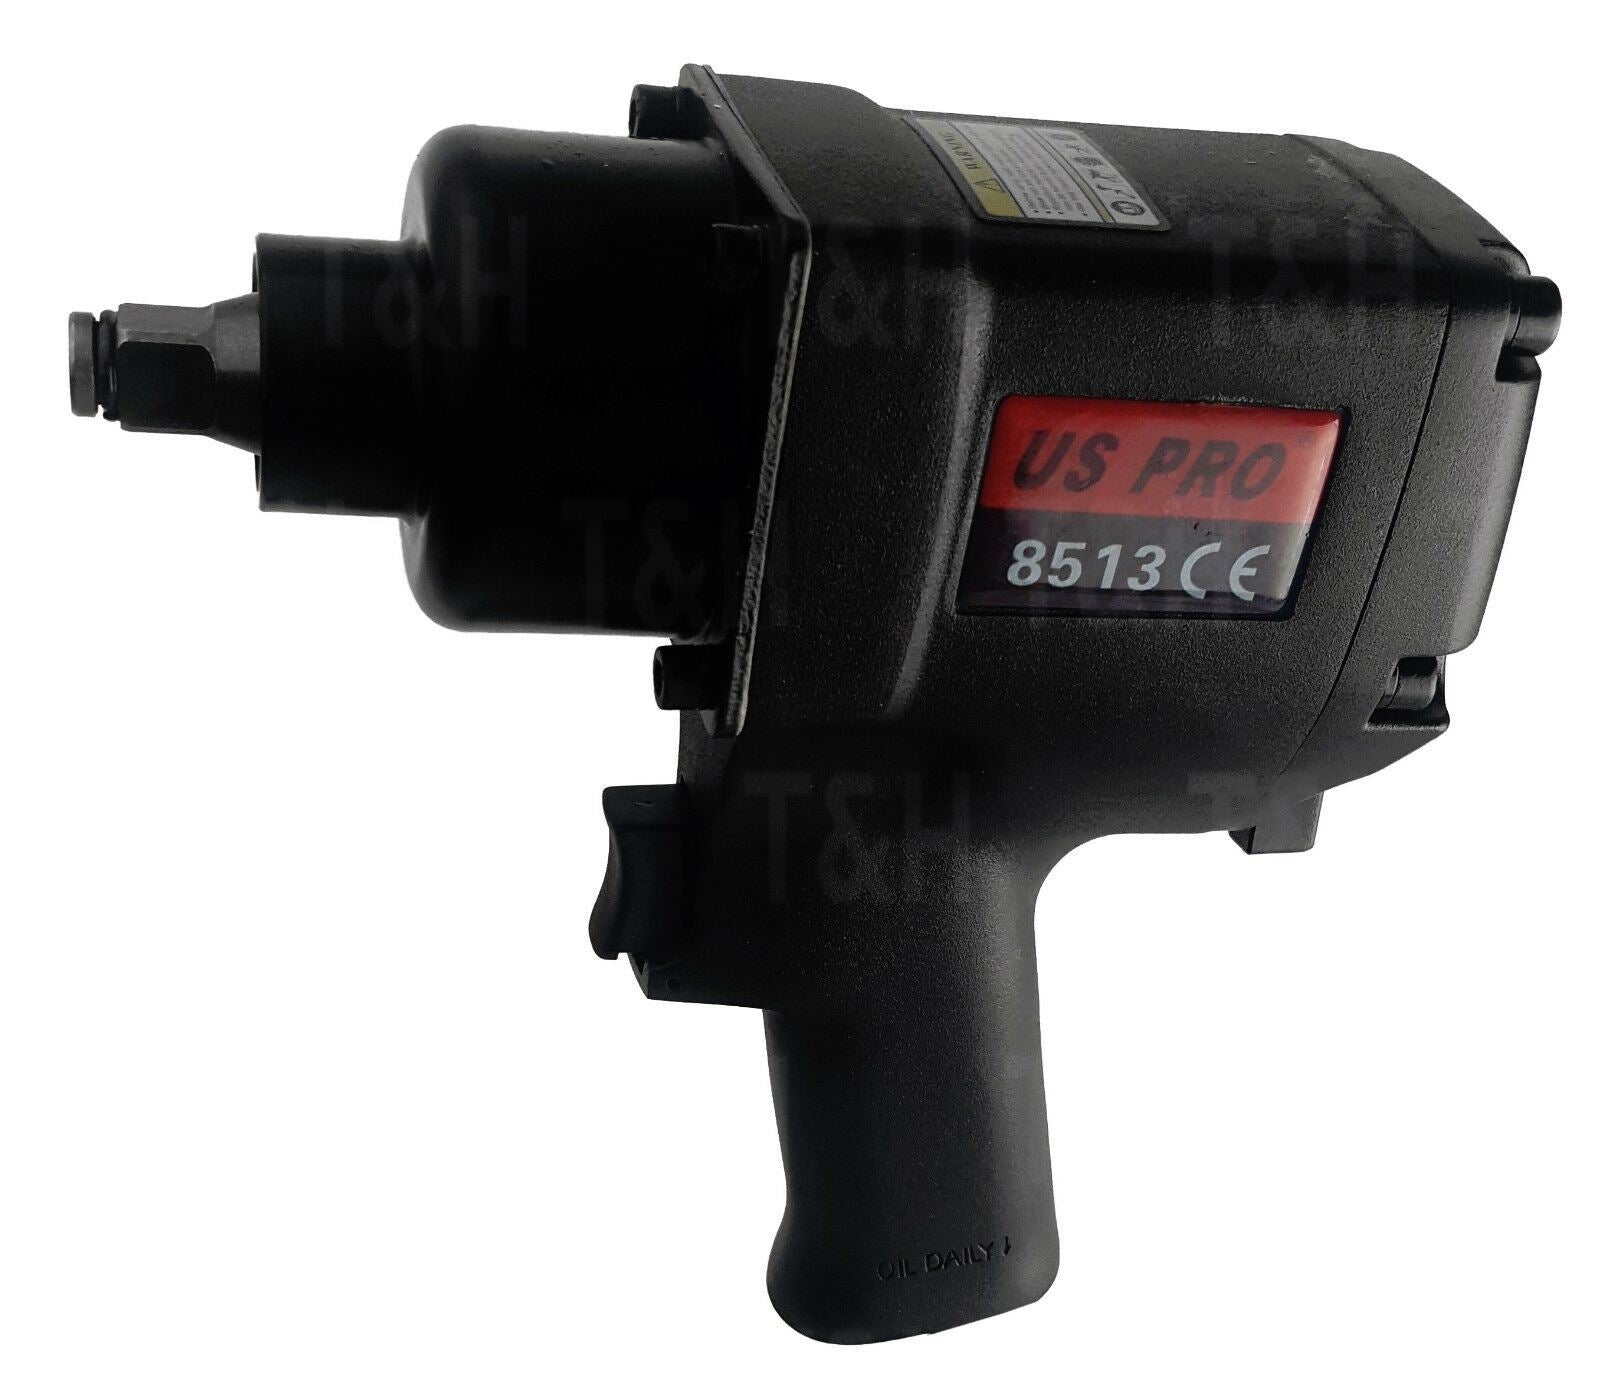 US PRO 1/2" DRIVE AIR IMPACT WRENCH 800Nm